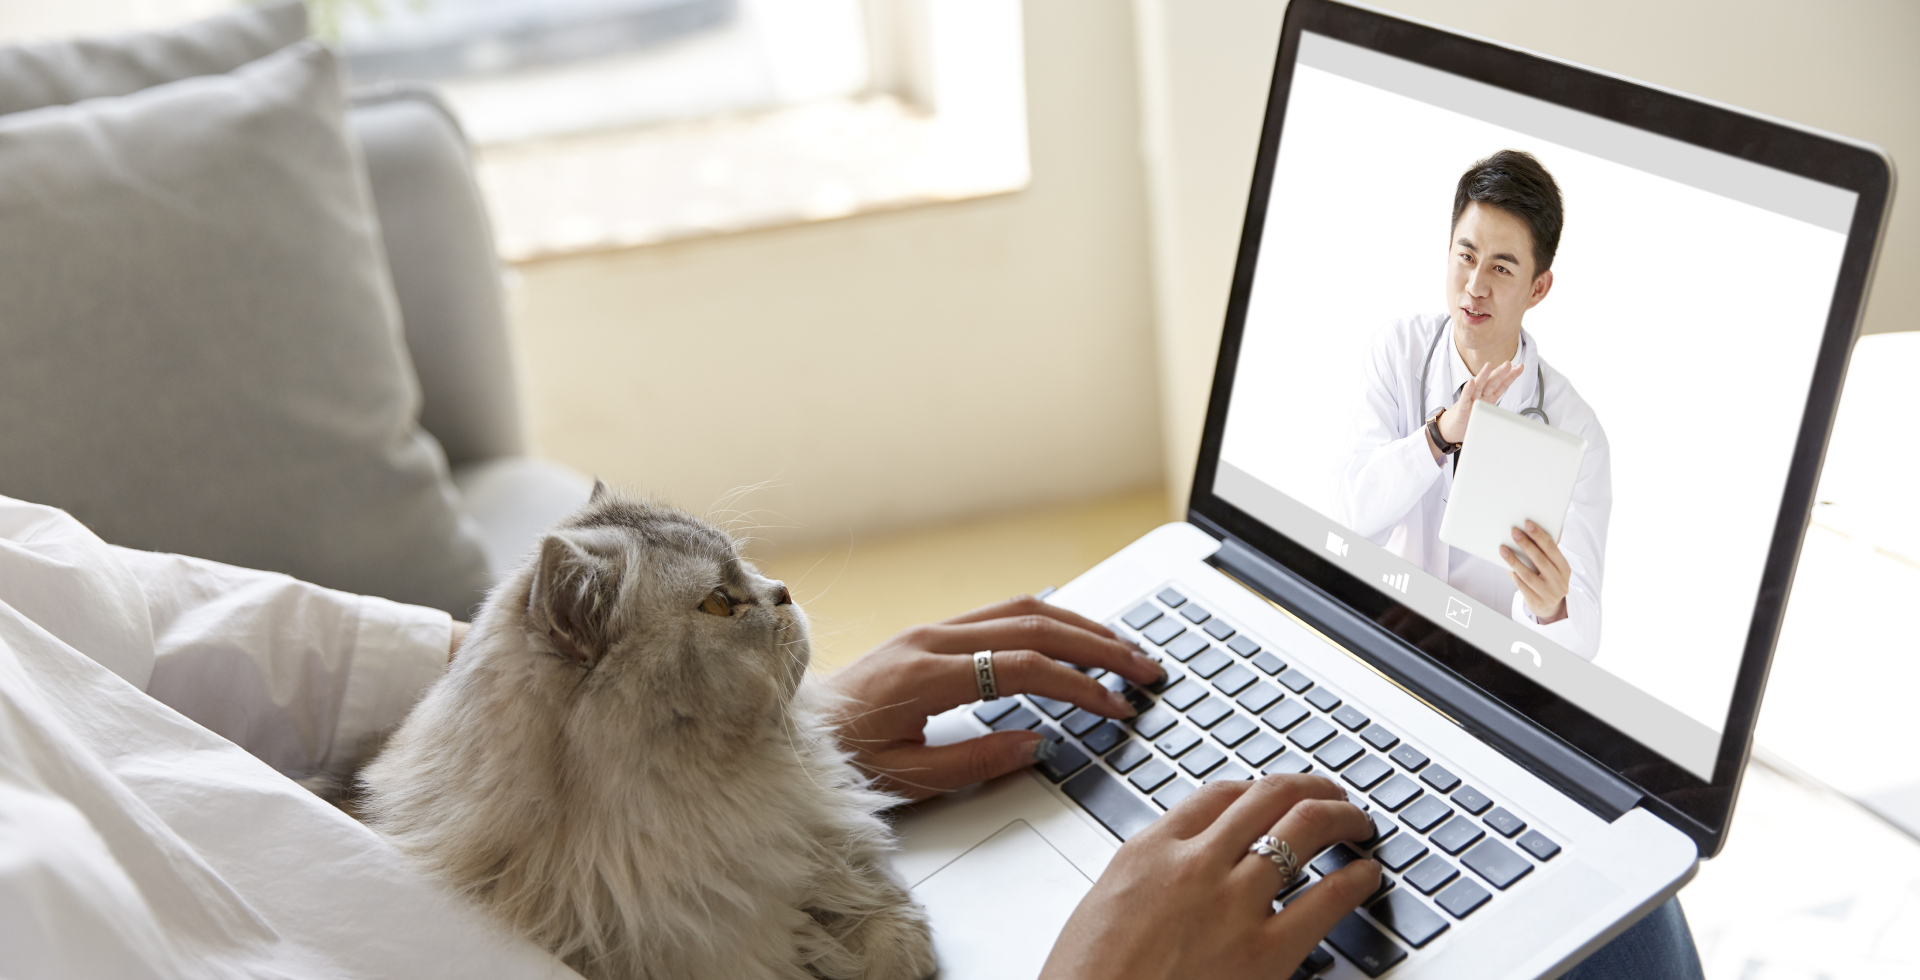 Female hands on a laptop with a persina cat looking at the screen.